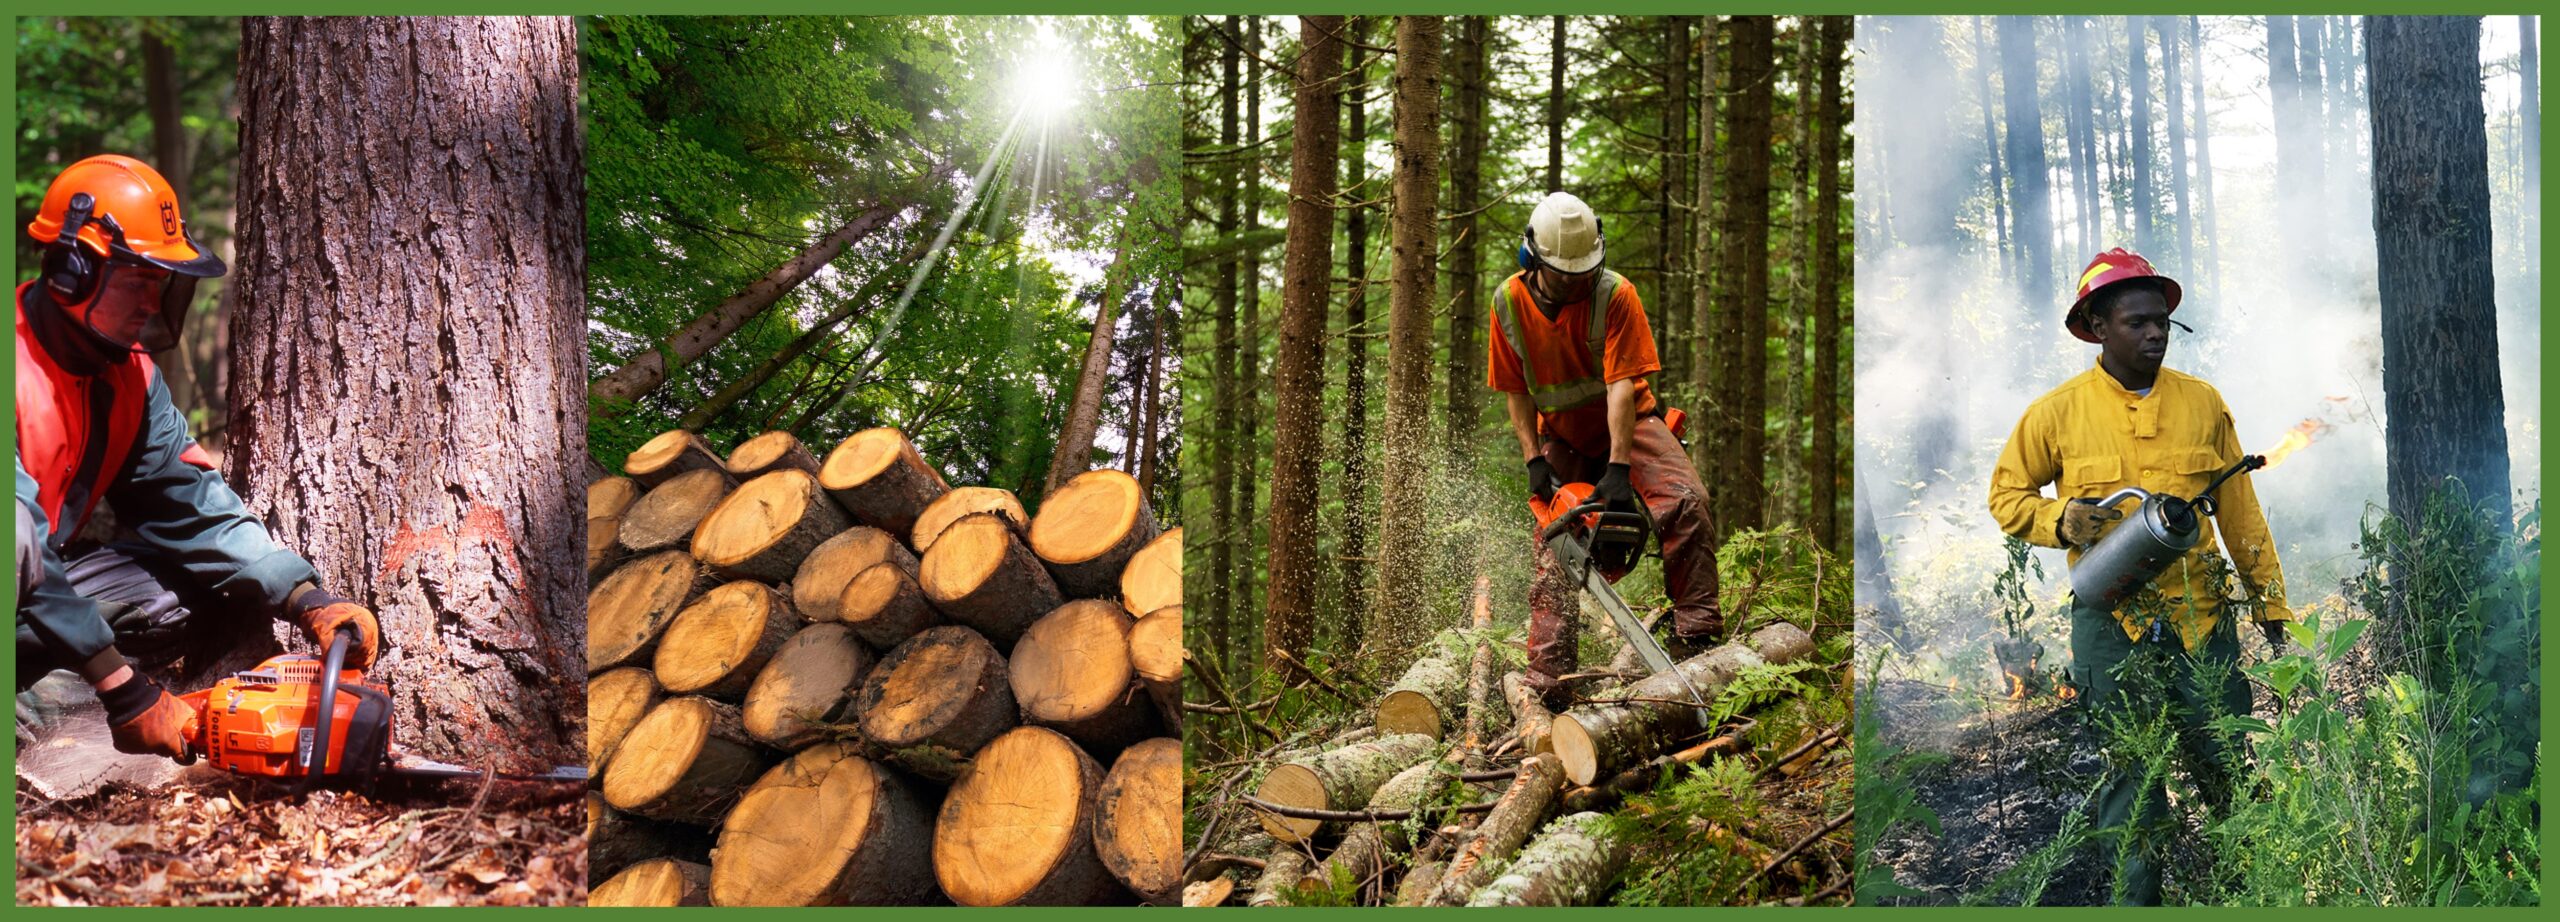 Read more about the article Retrospective Risk Assessment of Injuries and Fatalities in the Forestry and Logging Workforce in the United States, 2003-2019